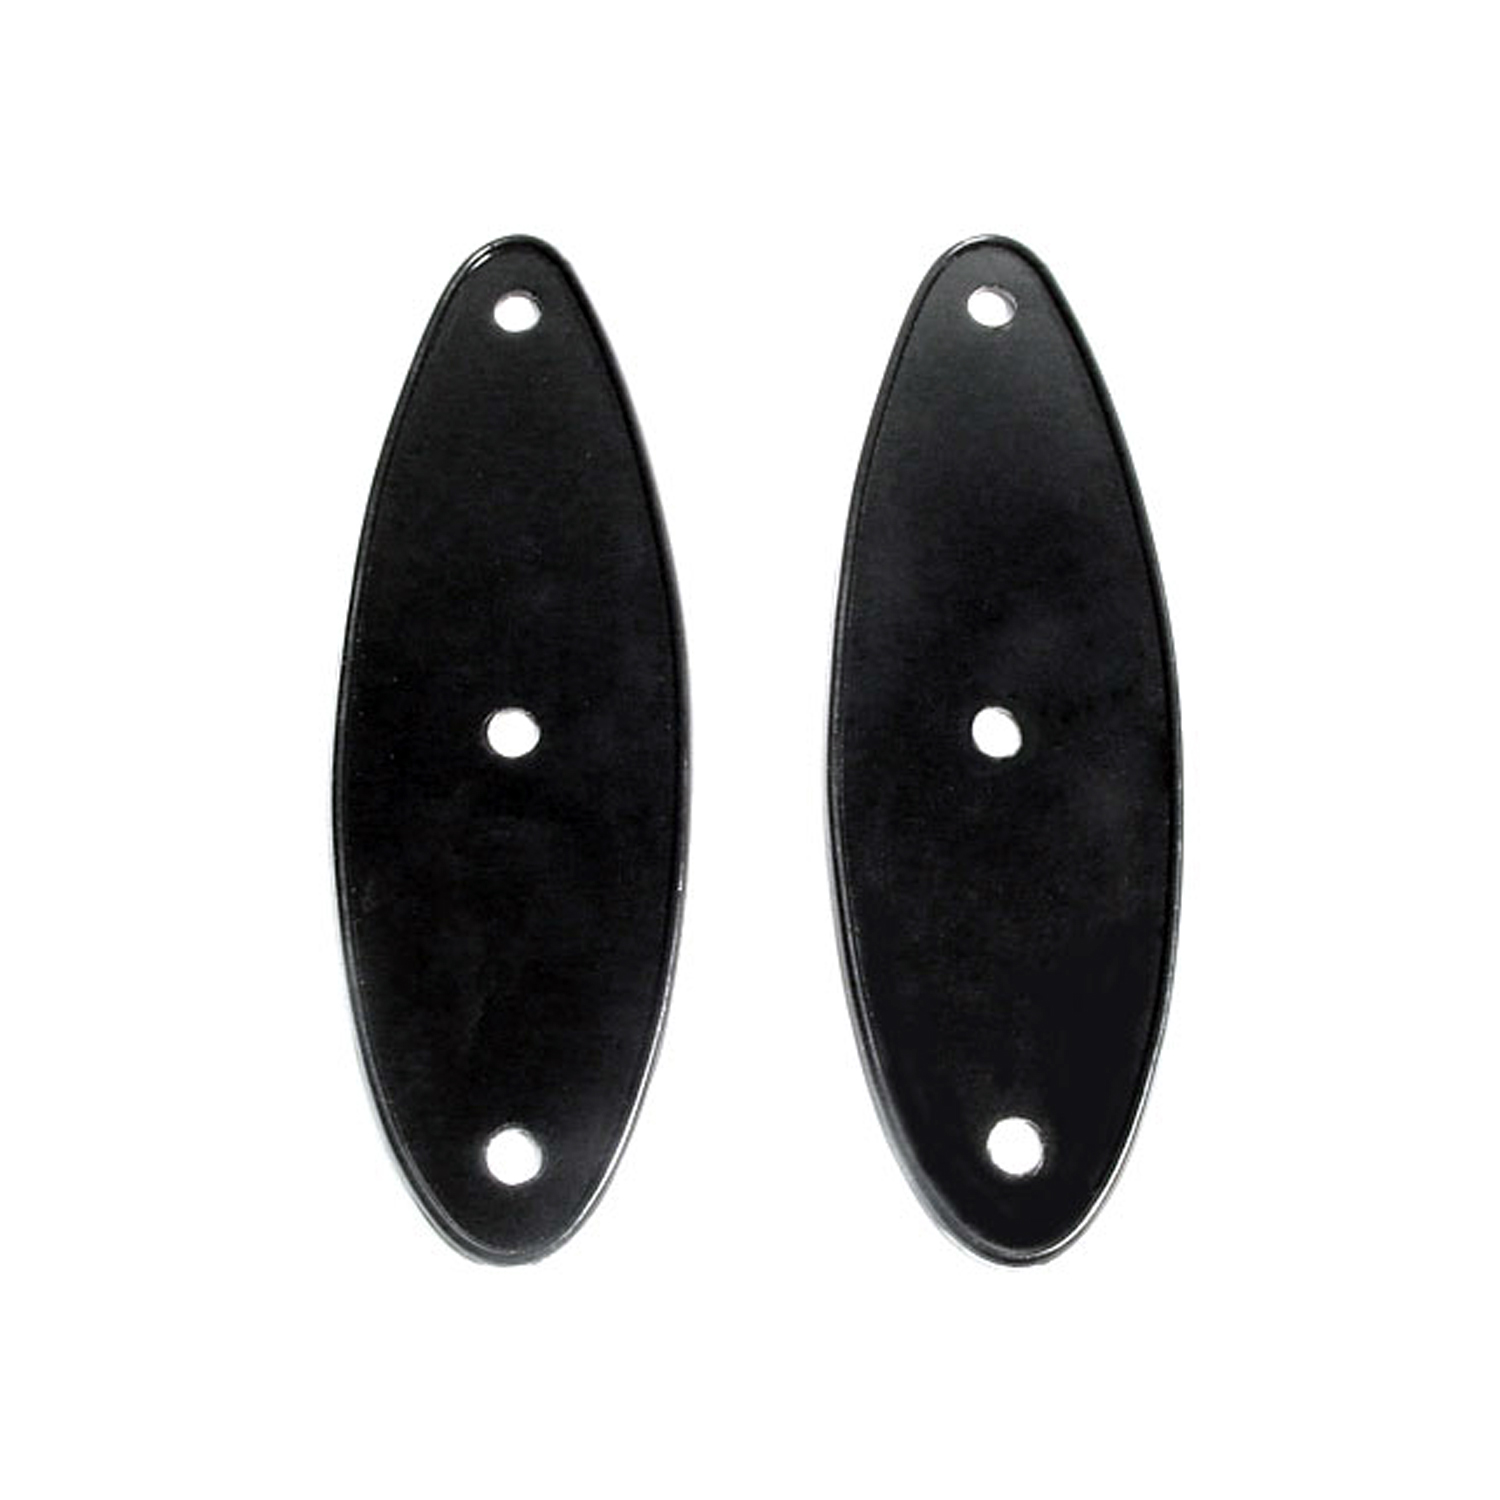 1940 LaSalle Special Series 52 Tail-Light Pads.  Fits 2-1/2 wide metal.  3 wide X 9 long-MP 420